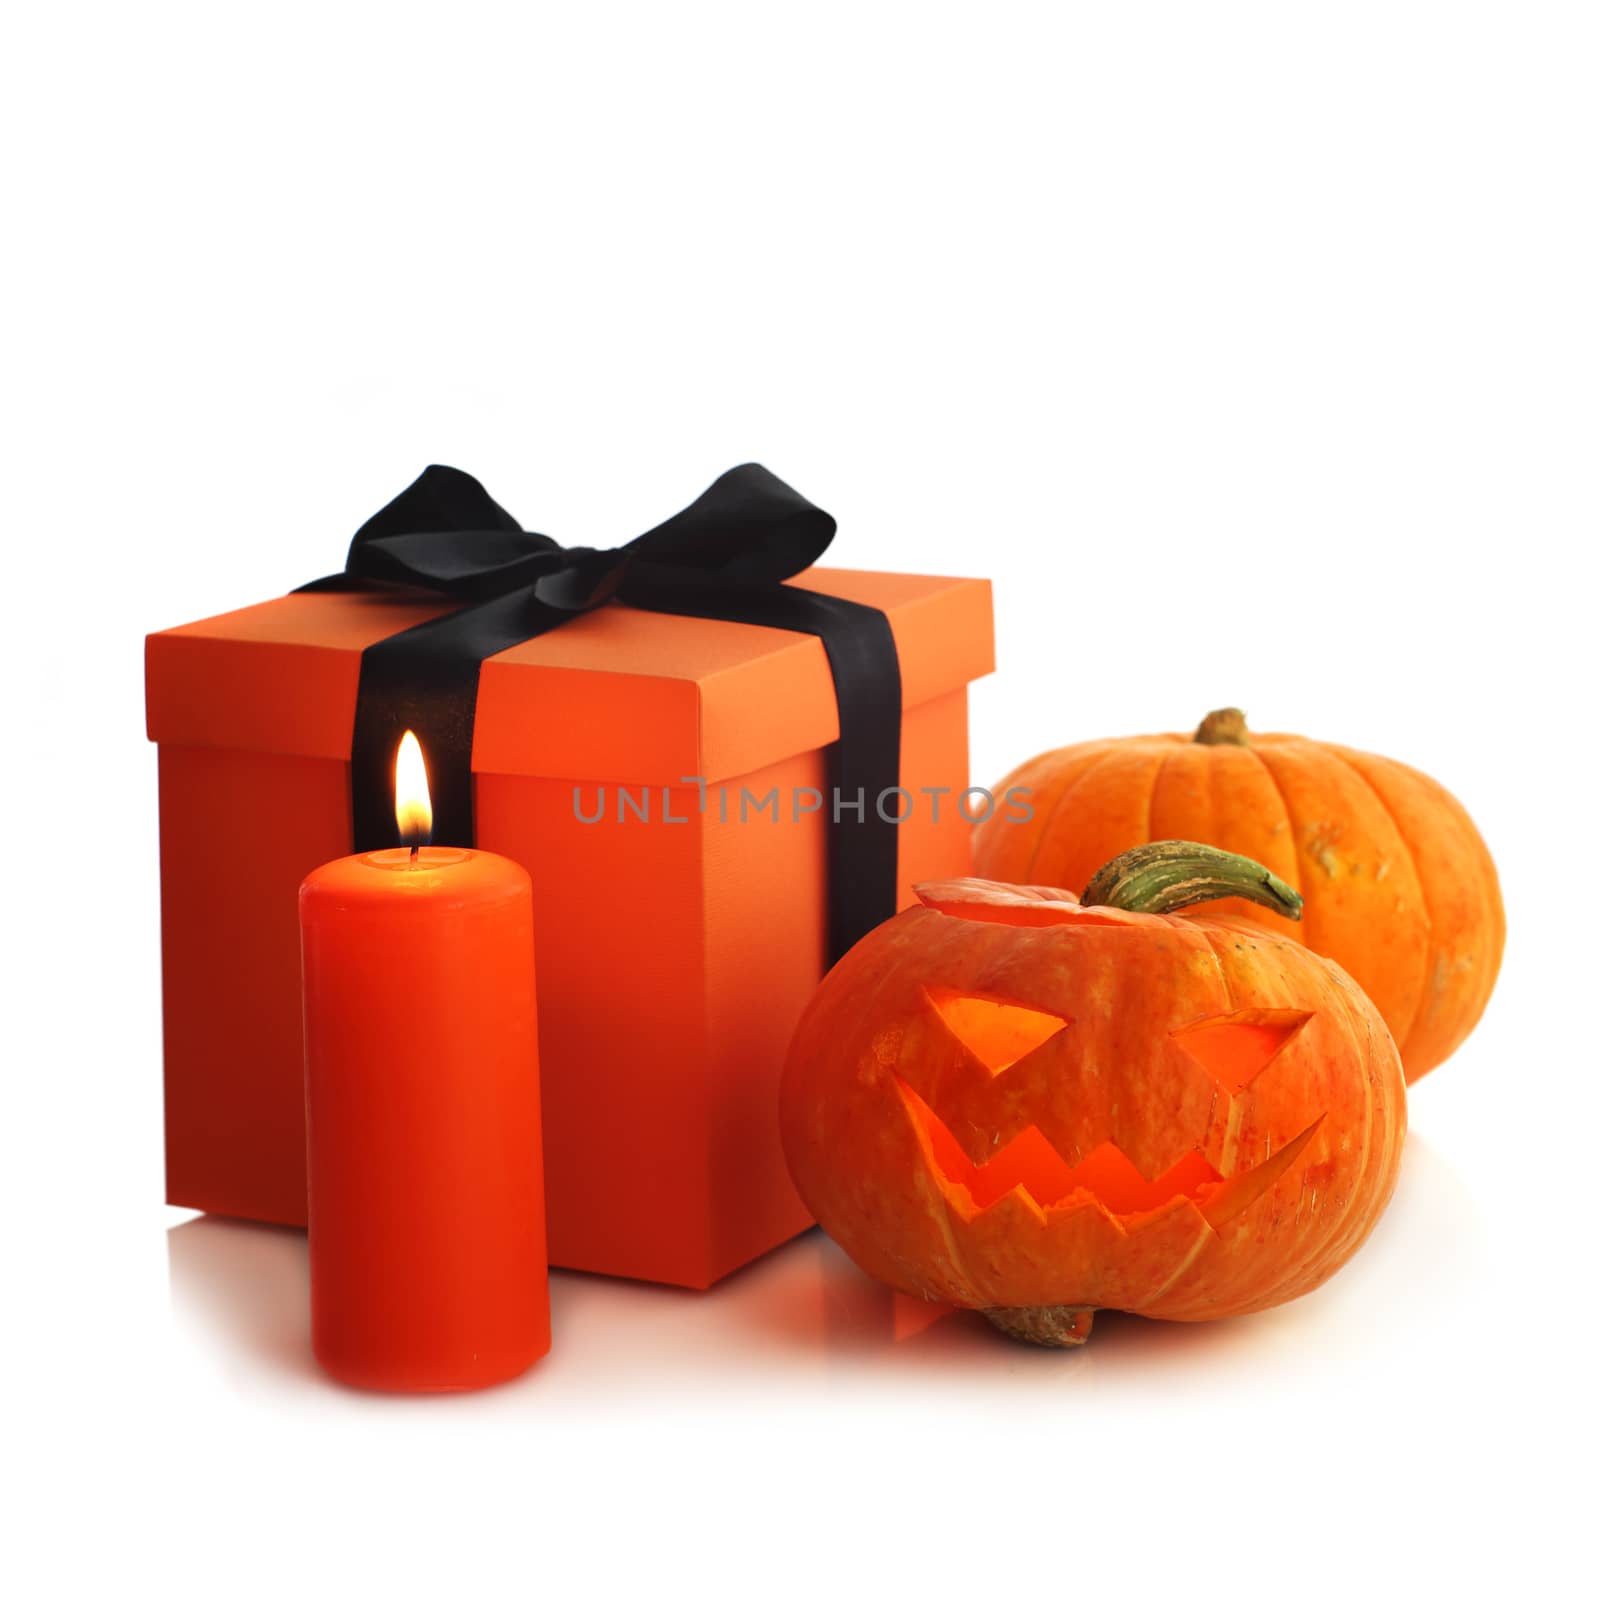 Halloween pumpkin and gifts isolated on white background